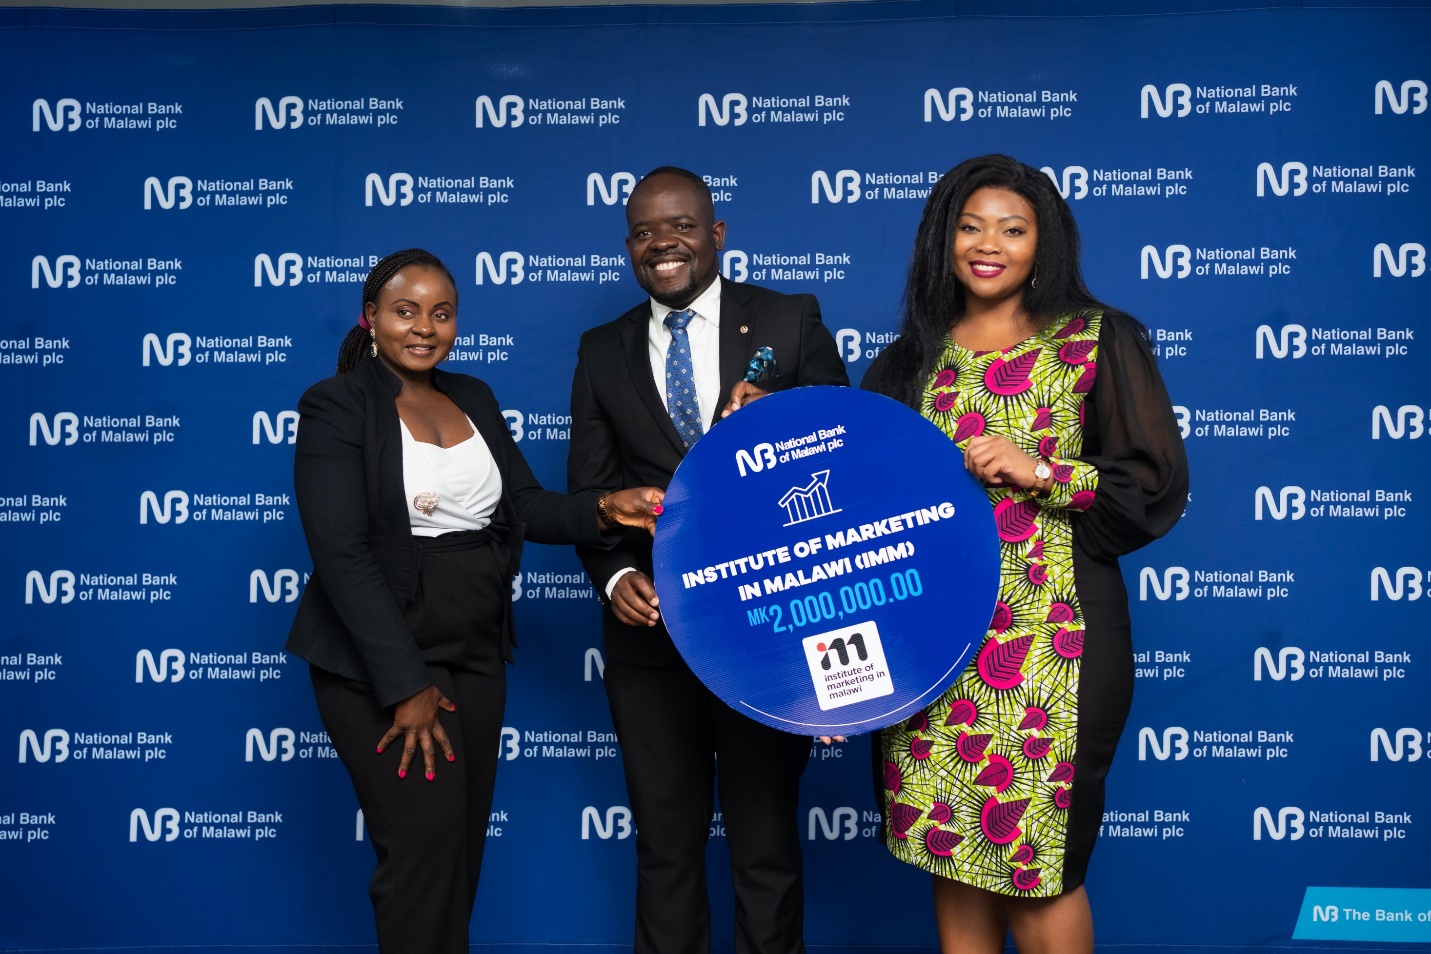 Akossa Hiwa (far right), Marketing and Corporate Affairs Manager presenting a dummy cheque to George Damsom (middle), the IMM Conference Chairperson.